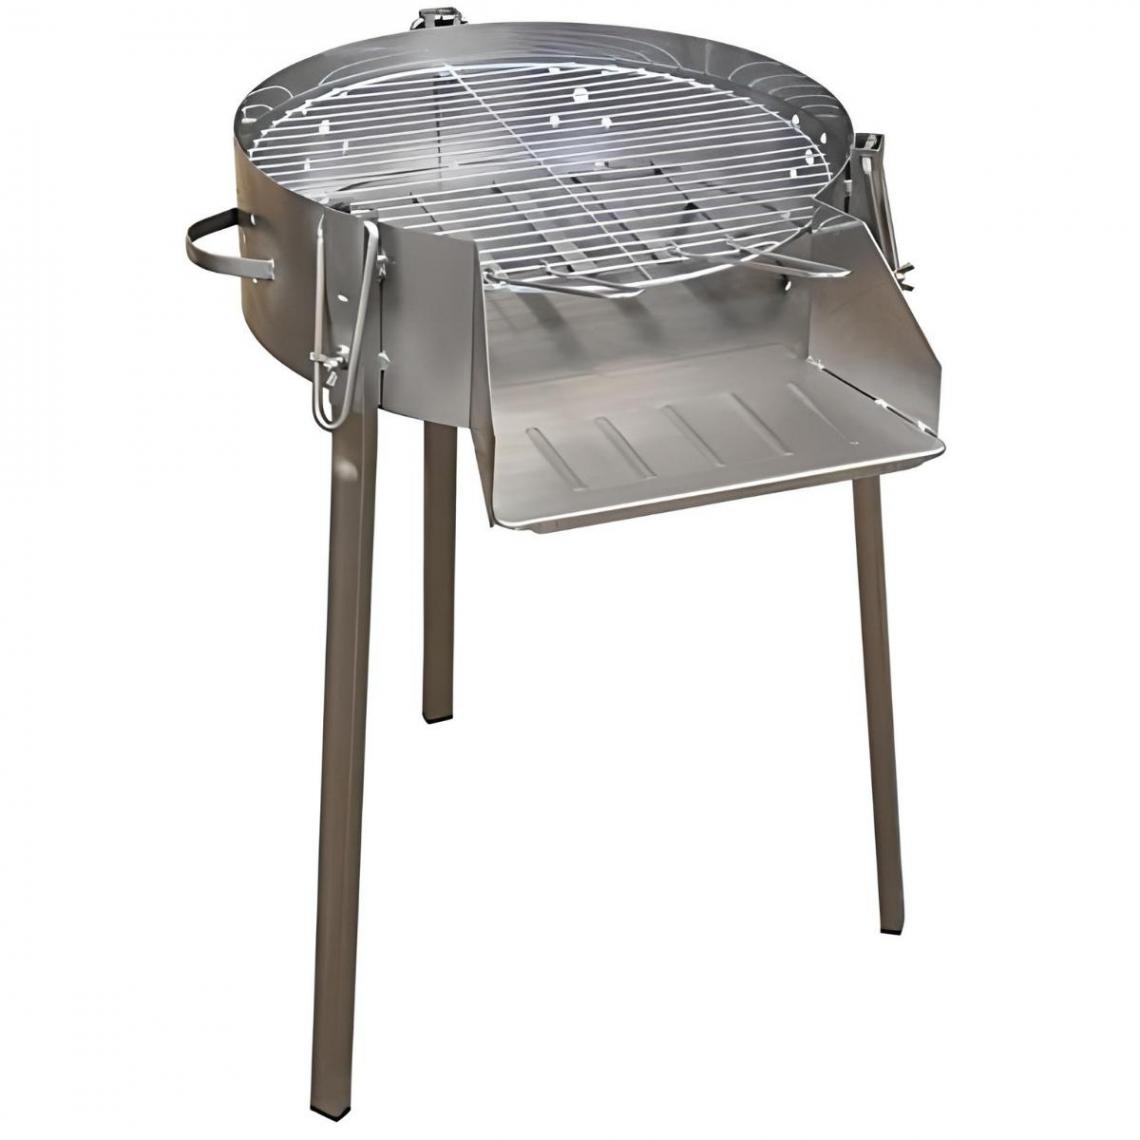 Visiodirect - Barbecue rond avec support en Inox coloris Gris - 50 cm x 81 x 93 cm - Barbecues gaz